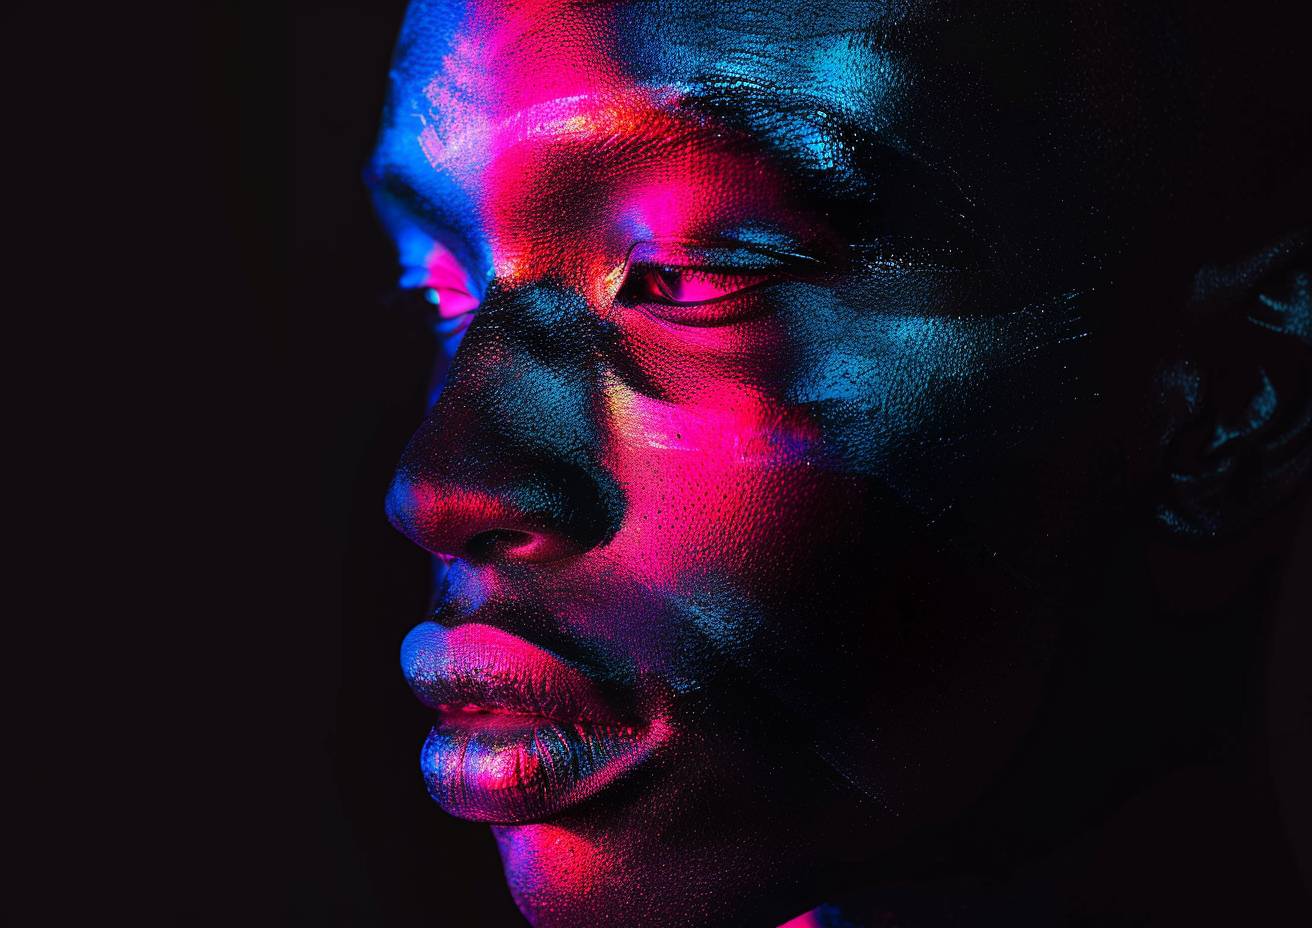 A portrait of [SUBJECT] in neon [COLOR] and deep black. Half of the face is dramatically illuminated by neon [COLOR] light, creating sharp shadows and a high-contrast effect, while the other half remains in deep shadow, against a minimalist black background --ar 7:5  --v 6.0